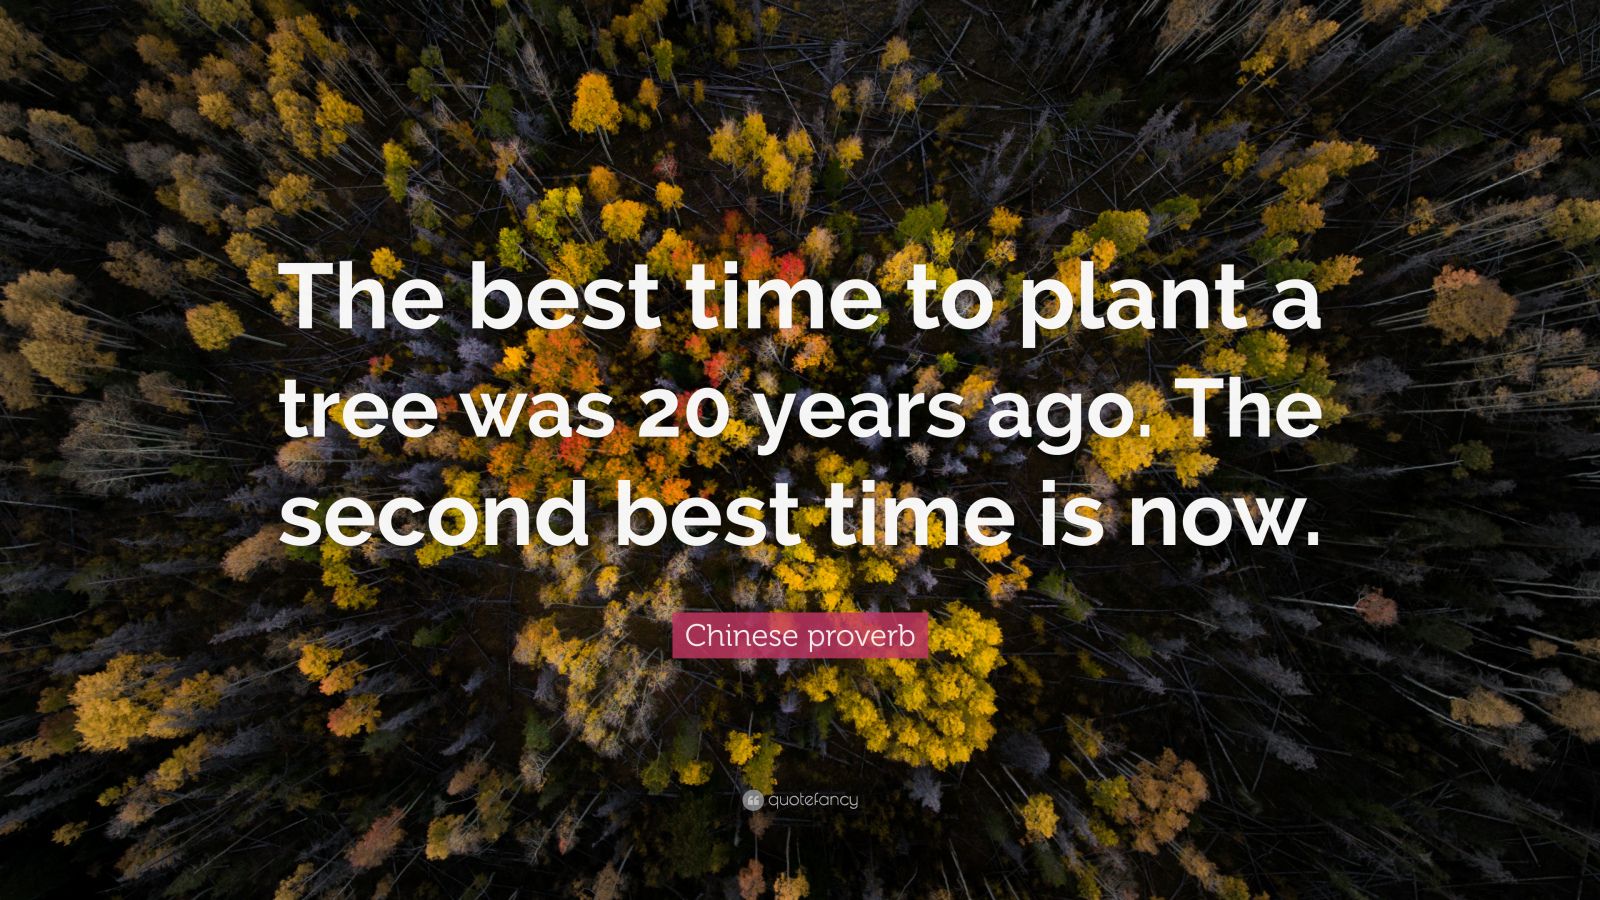 Chinese proverb Quote “The best time to plant a tree was 20 years ago